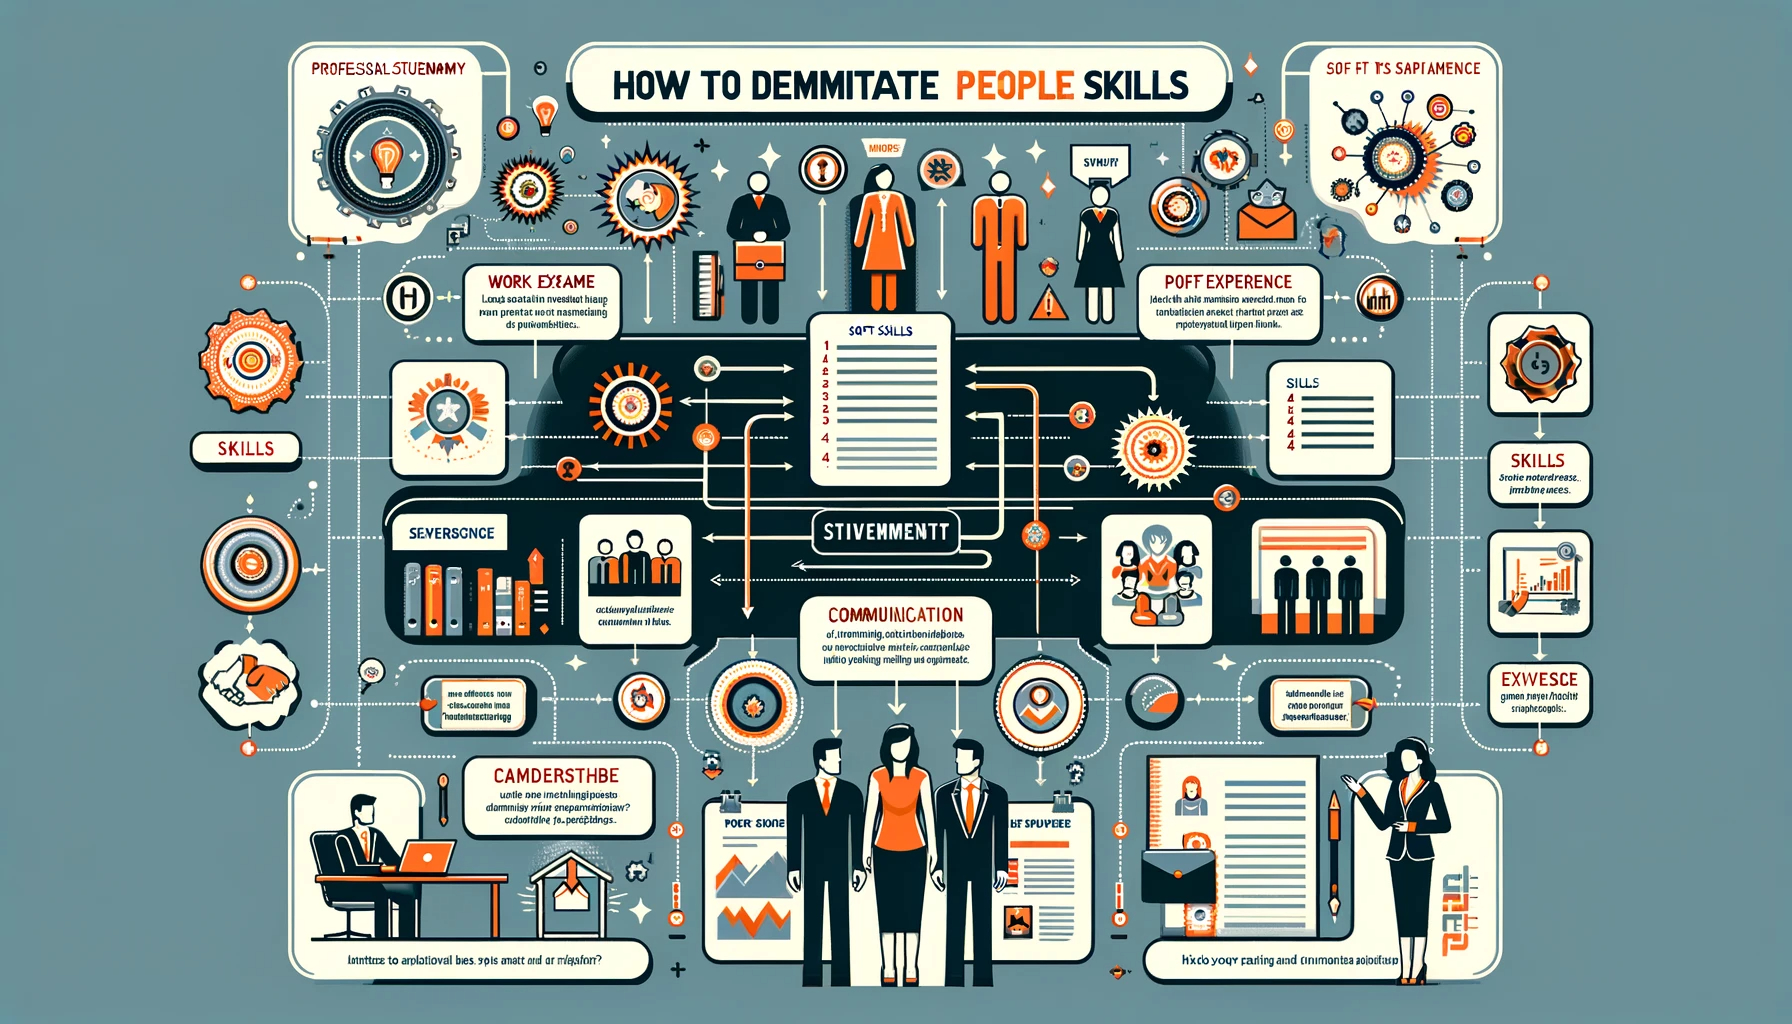 Demonstrating People Skills in Your IT Resume